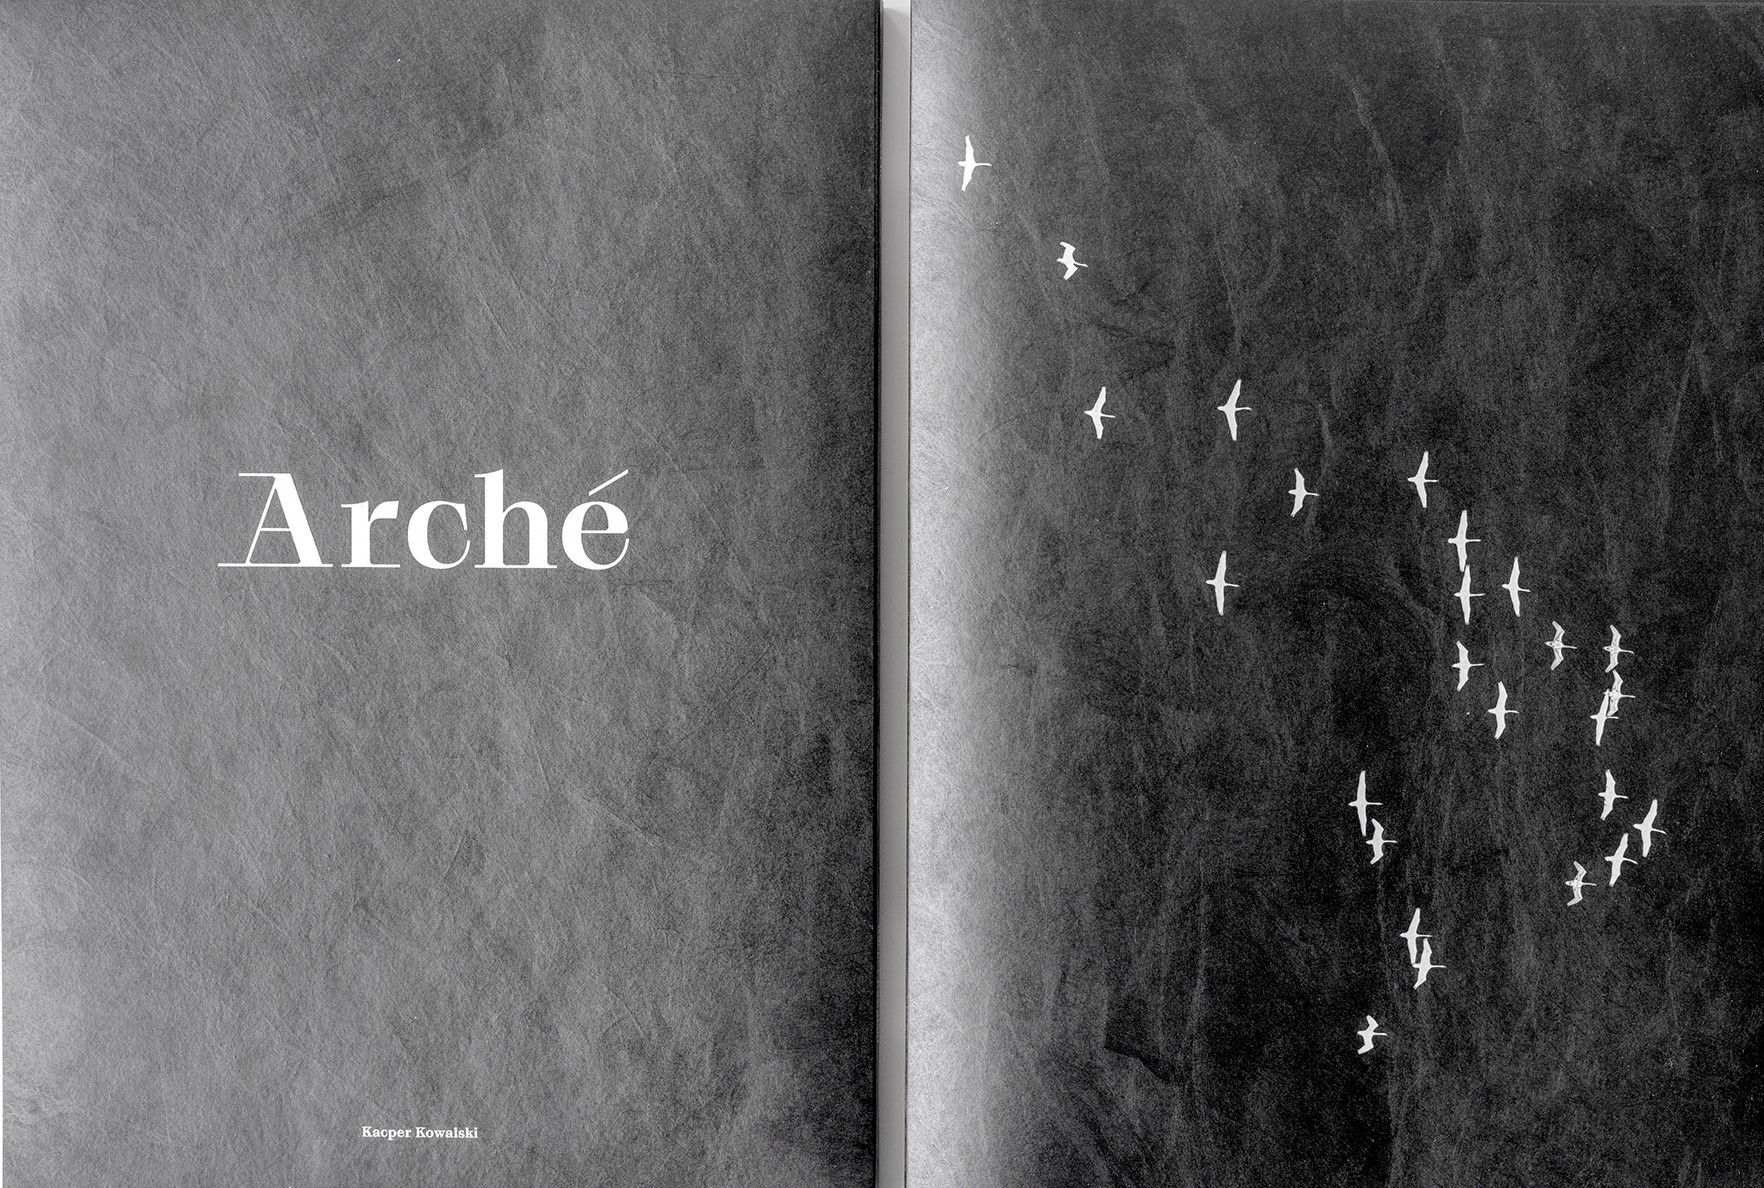 Arché, or returning to the beginnings of culture | Kacper Kowalski’s photobook